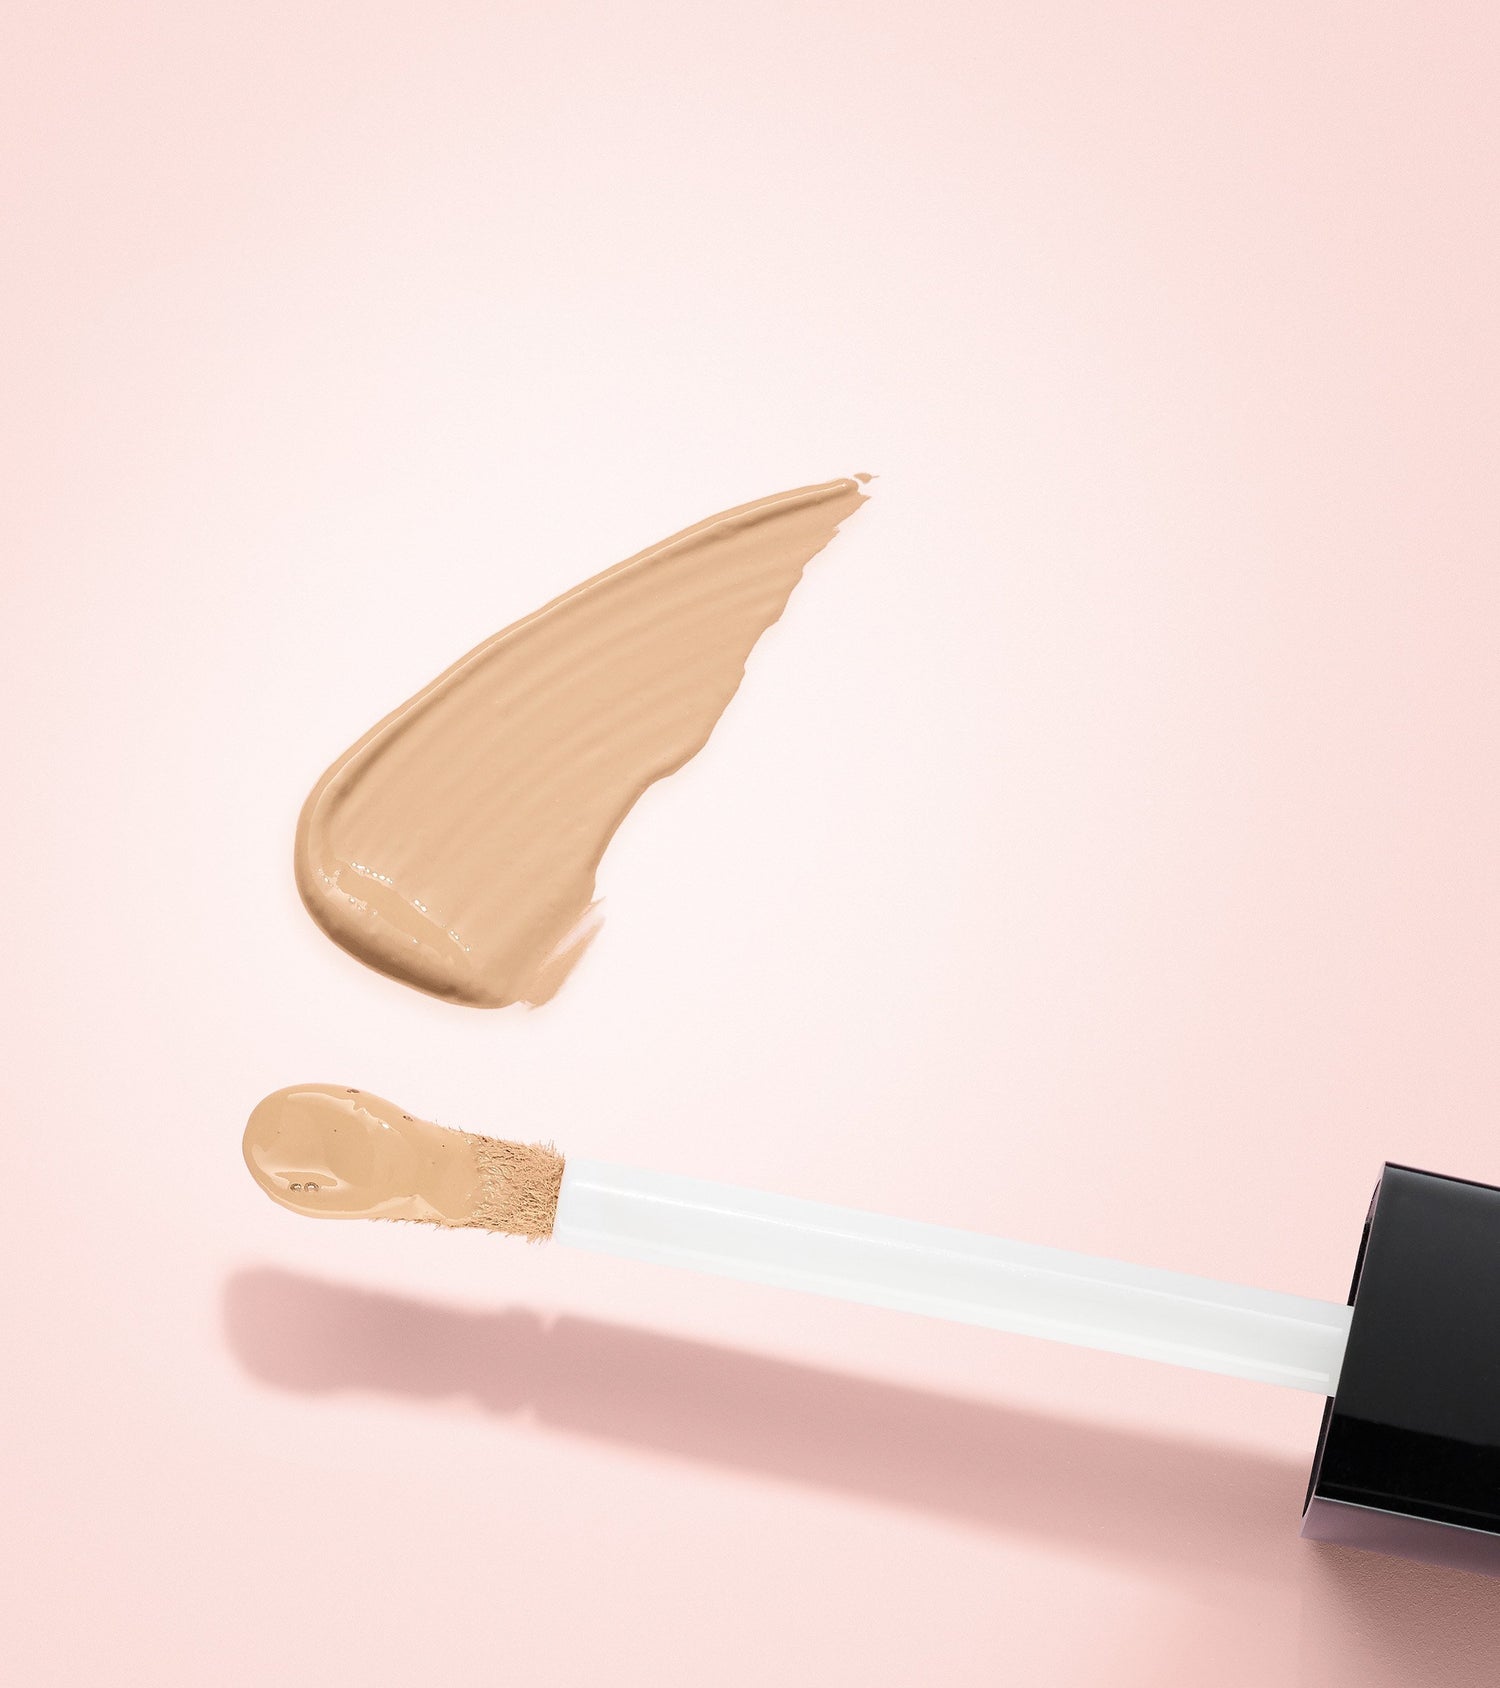 AUTHENTIK SKIN PERFECTOR CONCEALER (130 FOR REAL) Main Image featured